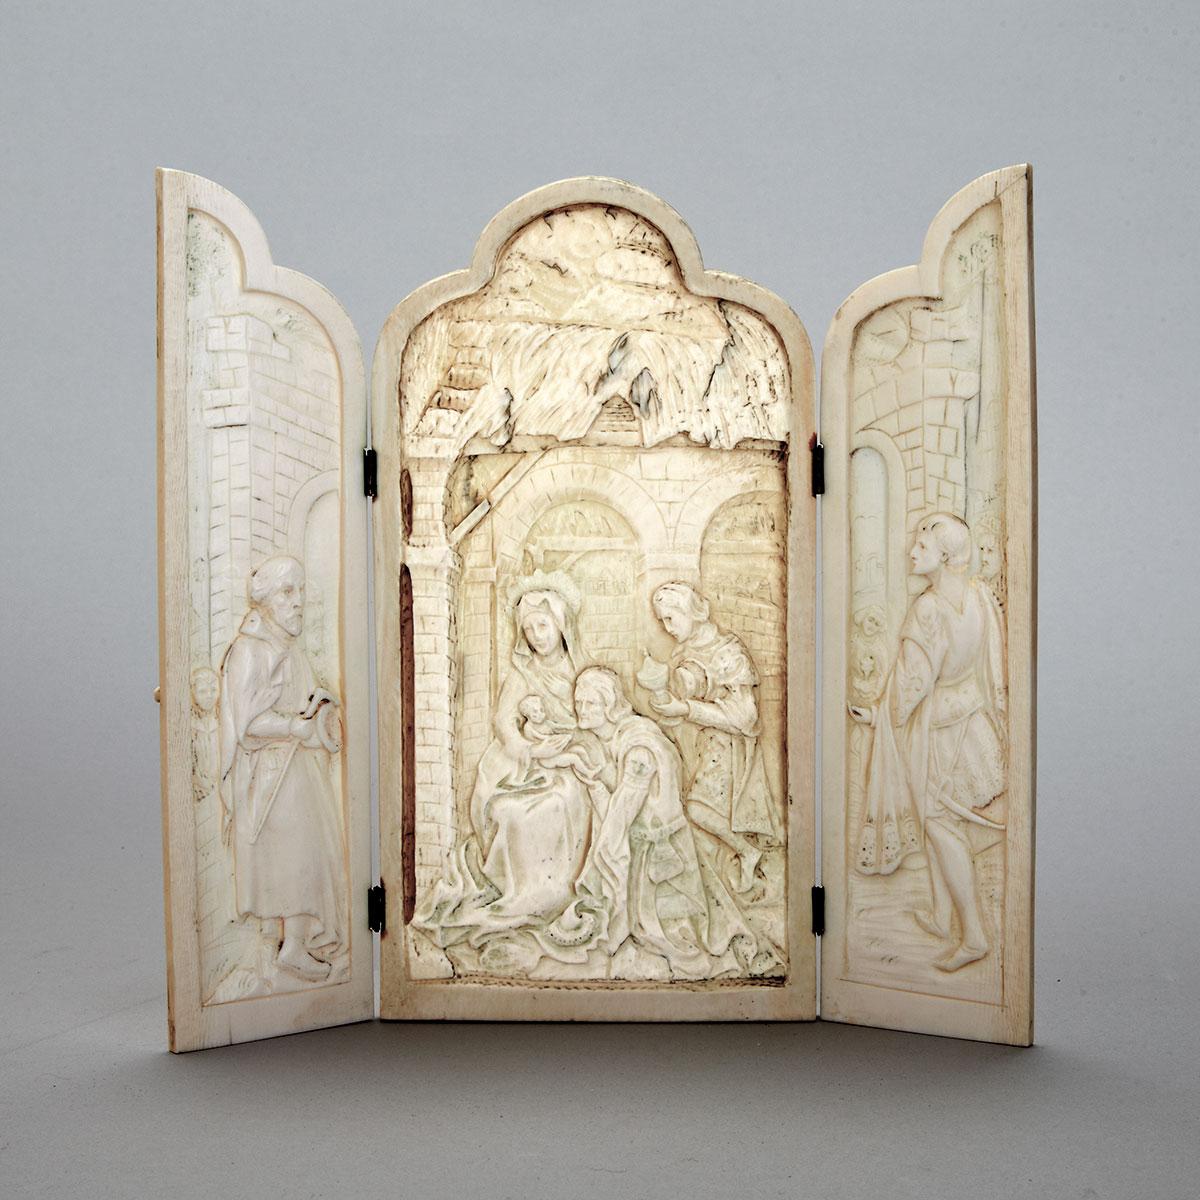 Dieppe Ivory Triptych Icon of The Adoration of the Magi, mid 19th century